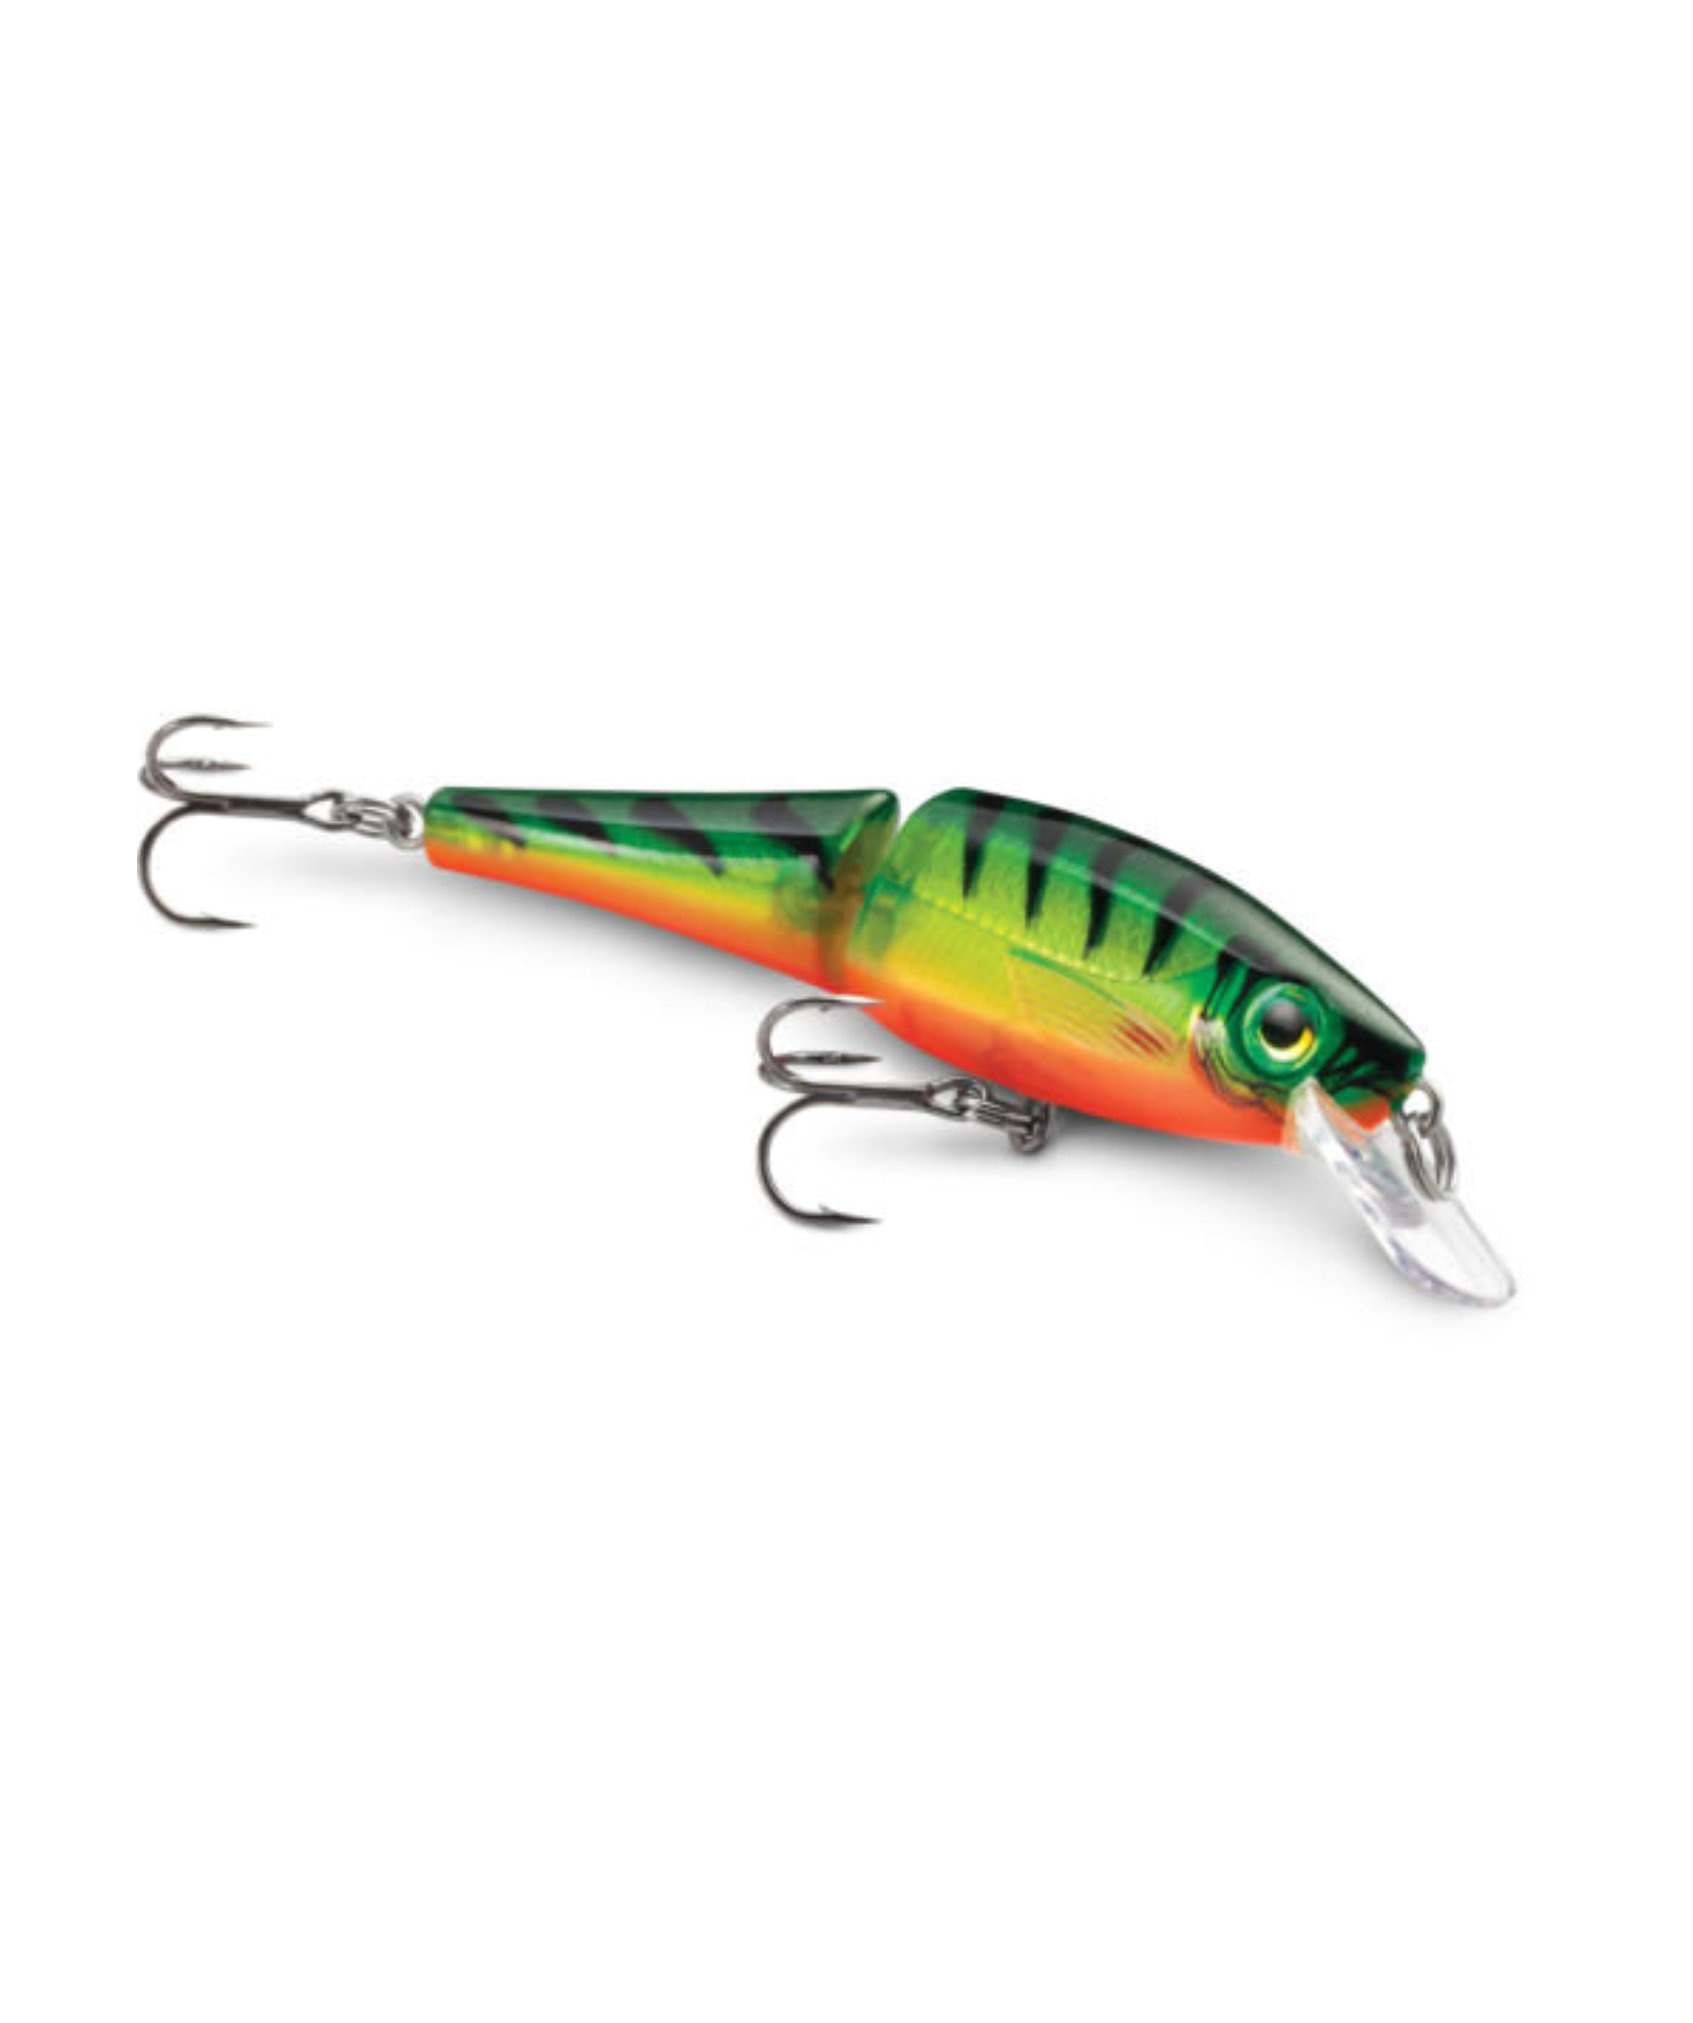 bx jointed minnow 09 firetiger - OutfitterSSM